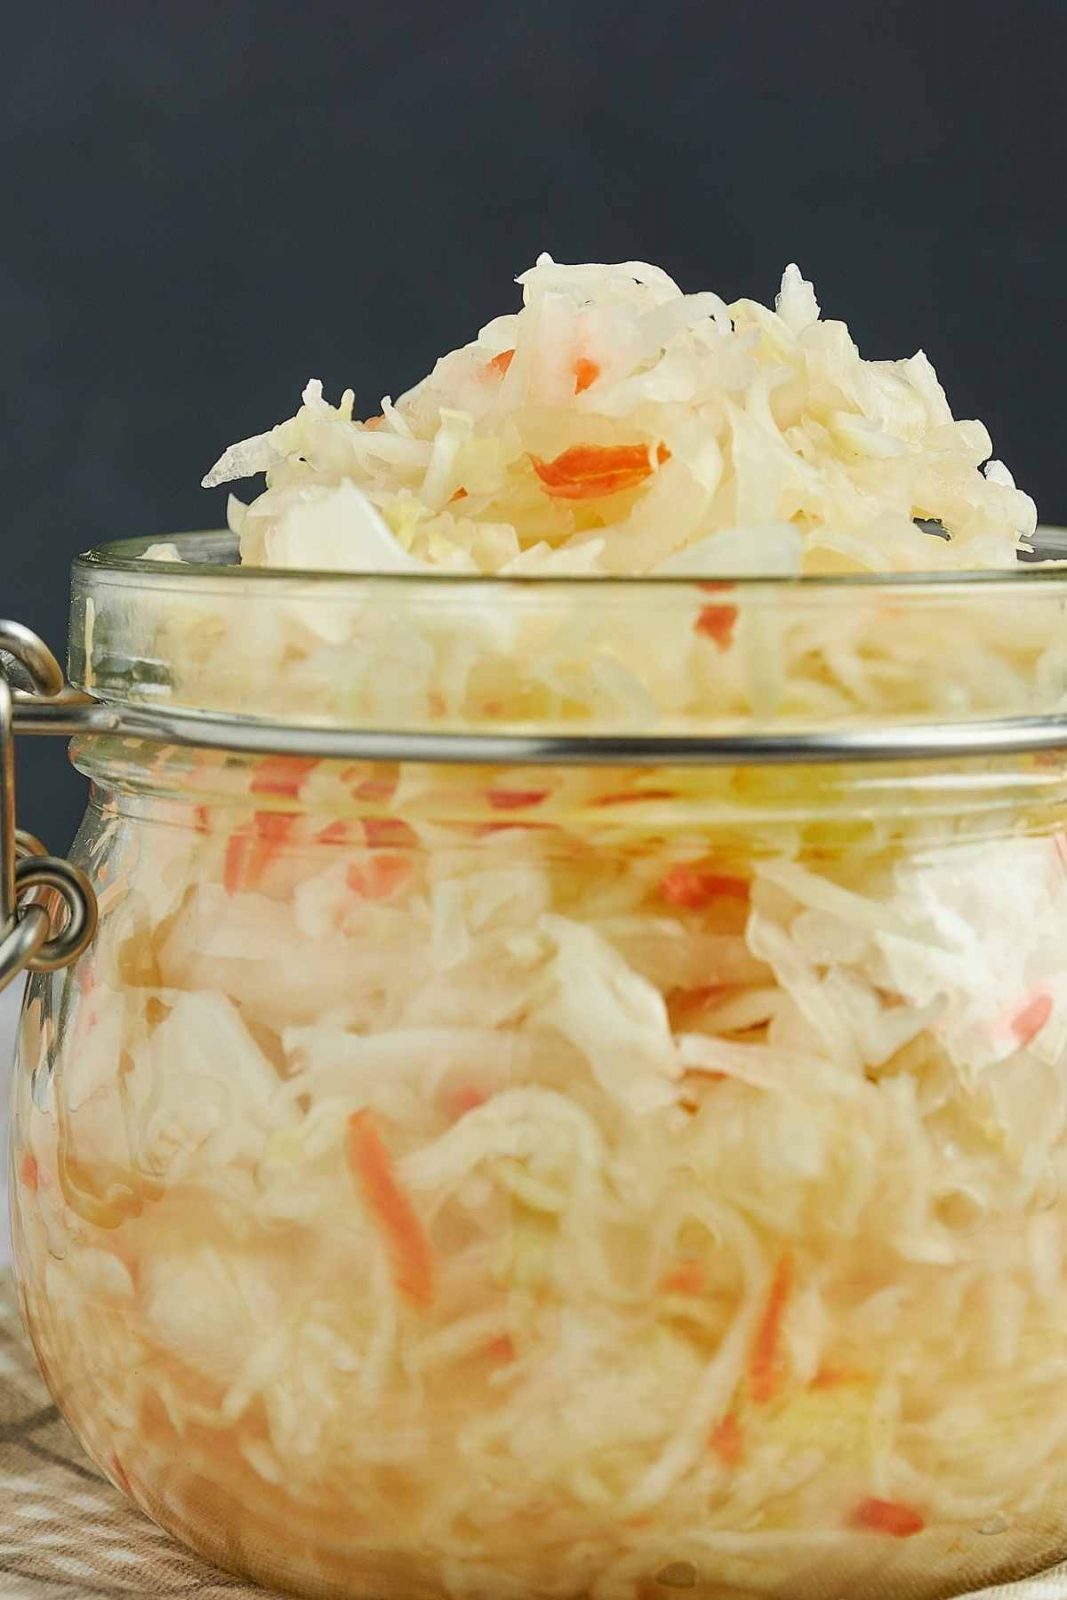 Want to extend the shelf life of sauerkraut? You’ll be happy to know that they freeze well. In this post, you’ll learn everything about how to freeze sauerkraut properly and how to cook frozen sauerkraut.